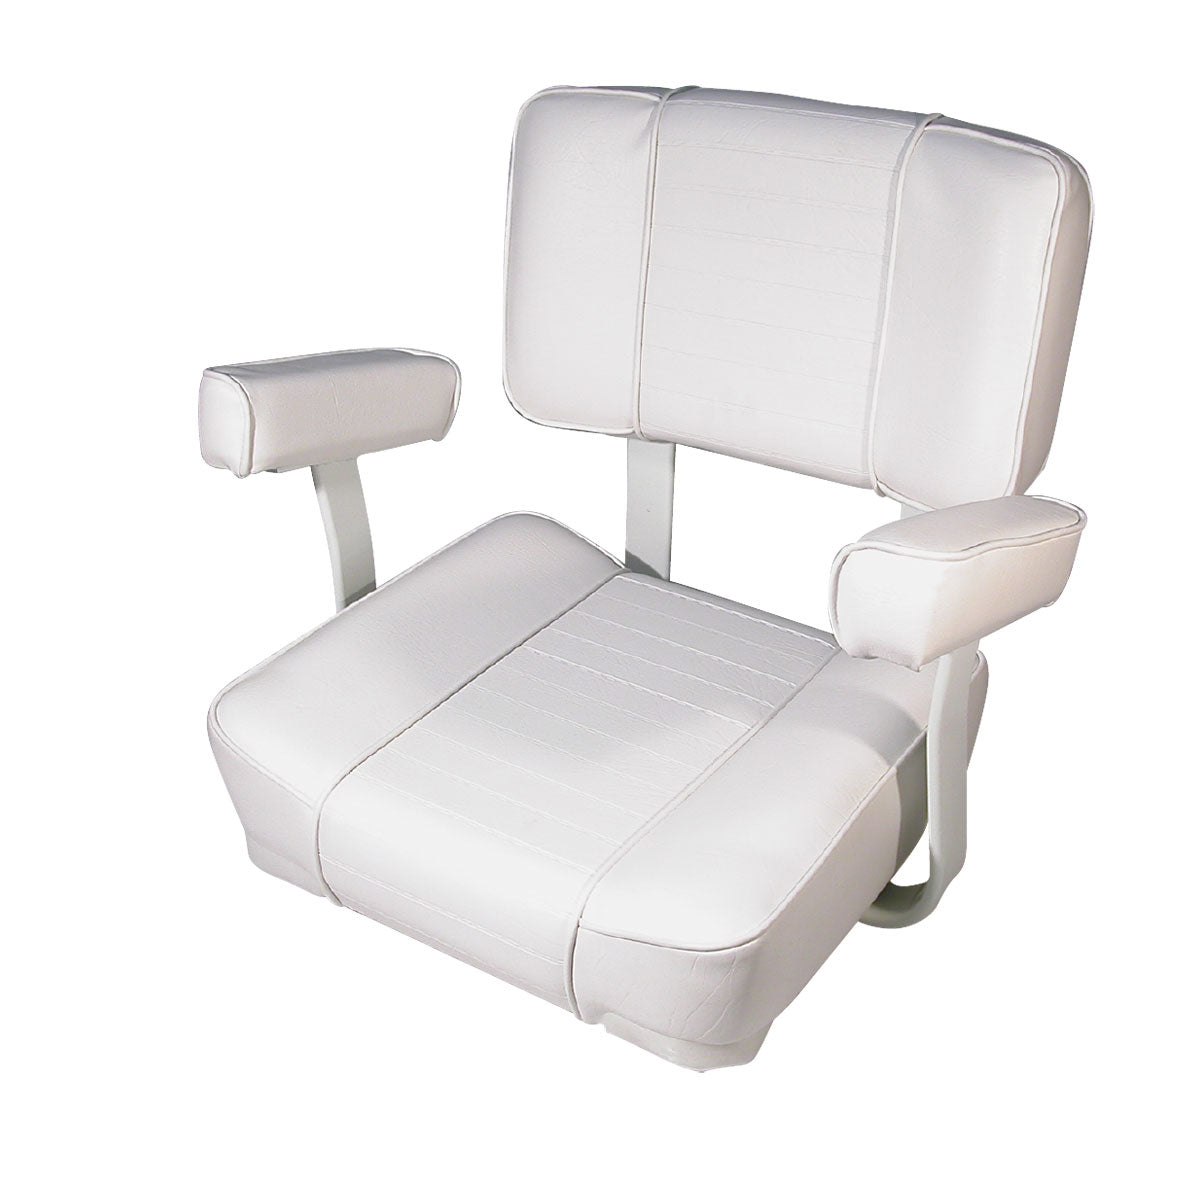 Upholstered Seat - Deluxe